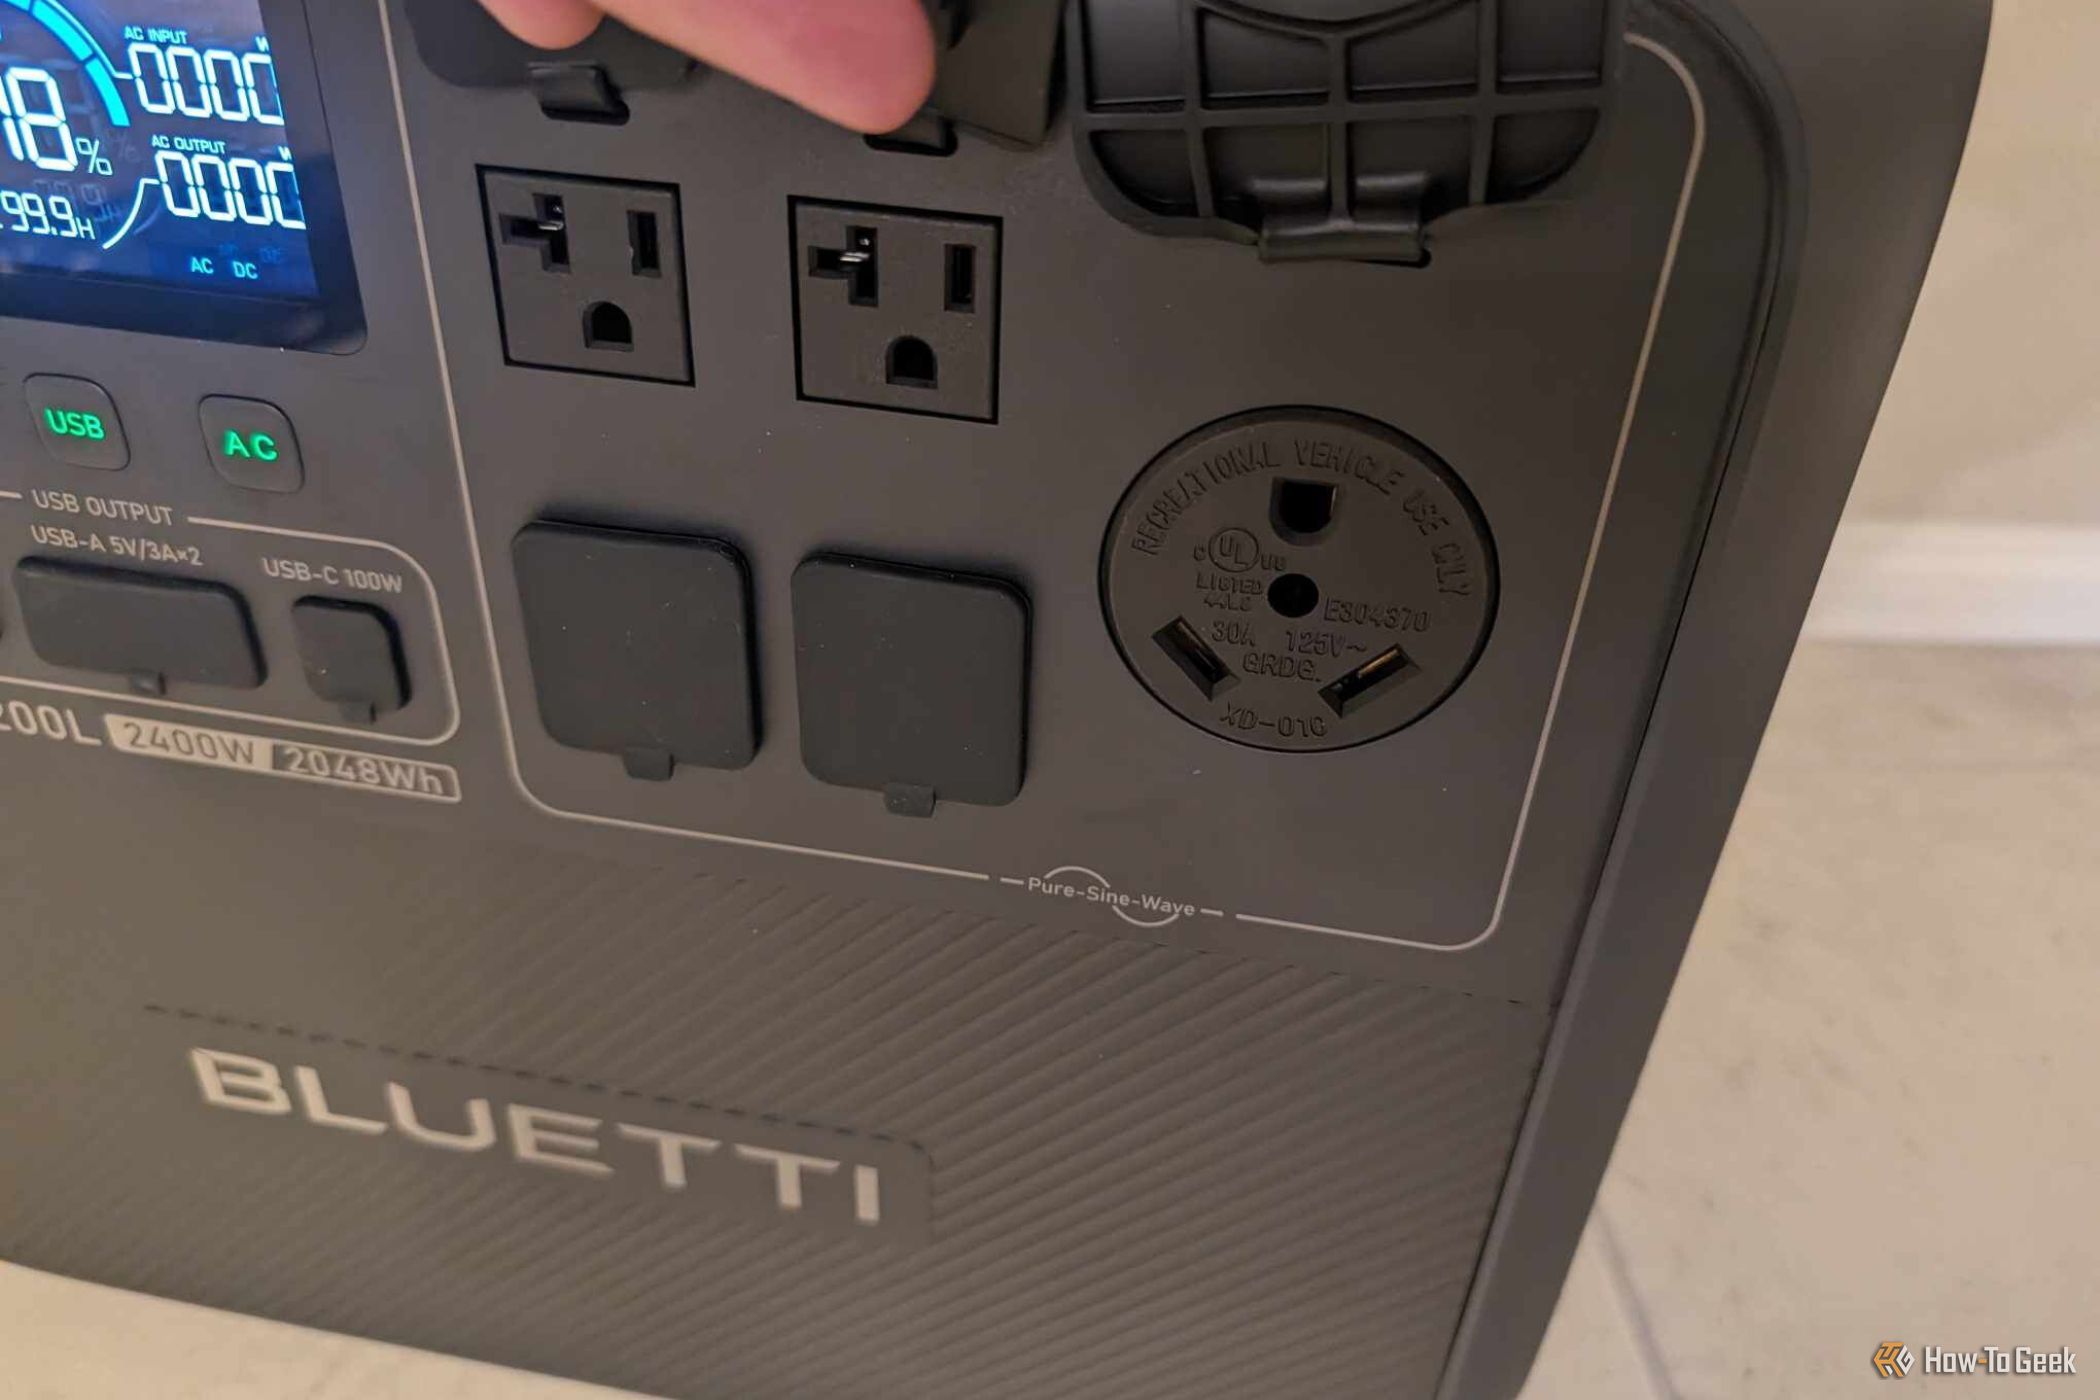 Bluetti AC200L Power Station displaying multiple output ports.